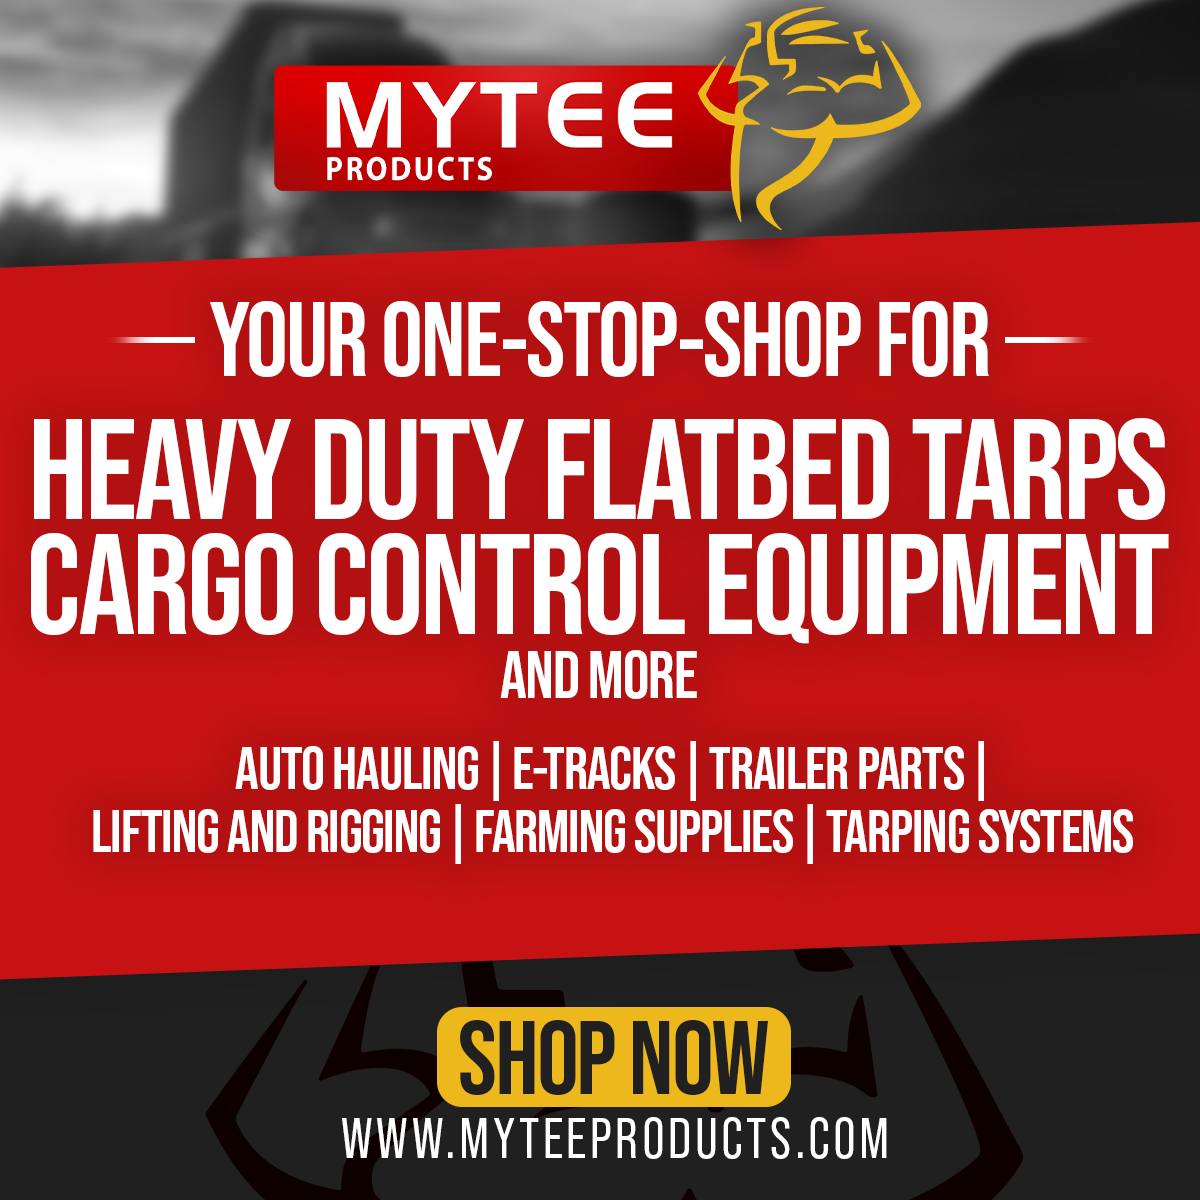 Mytee Flatbed Products